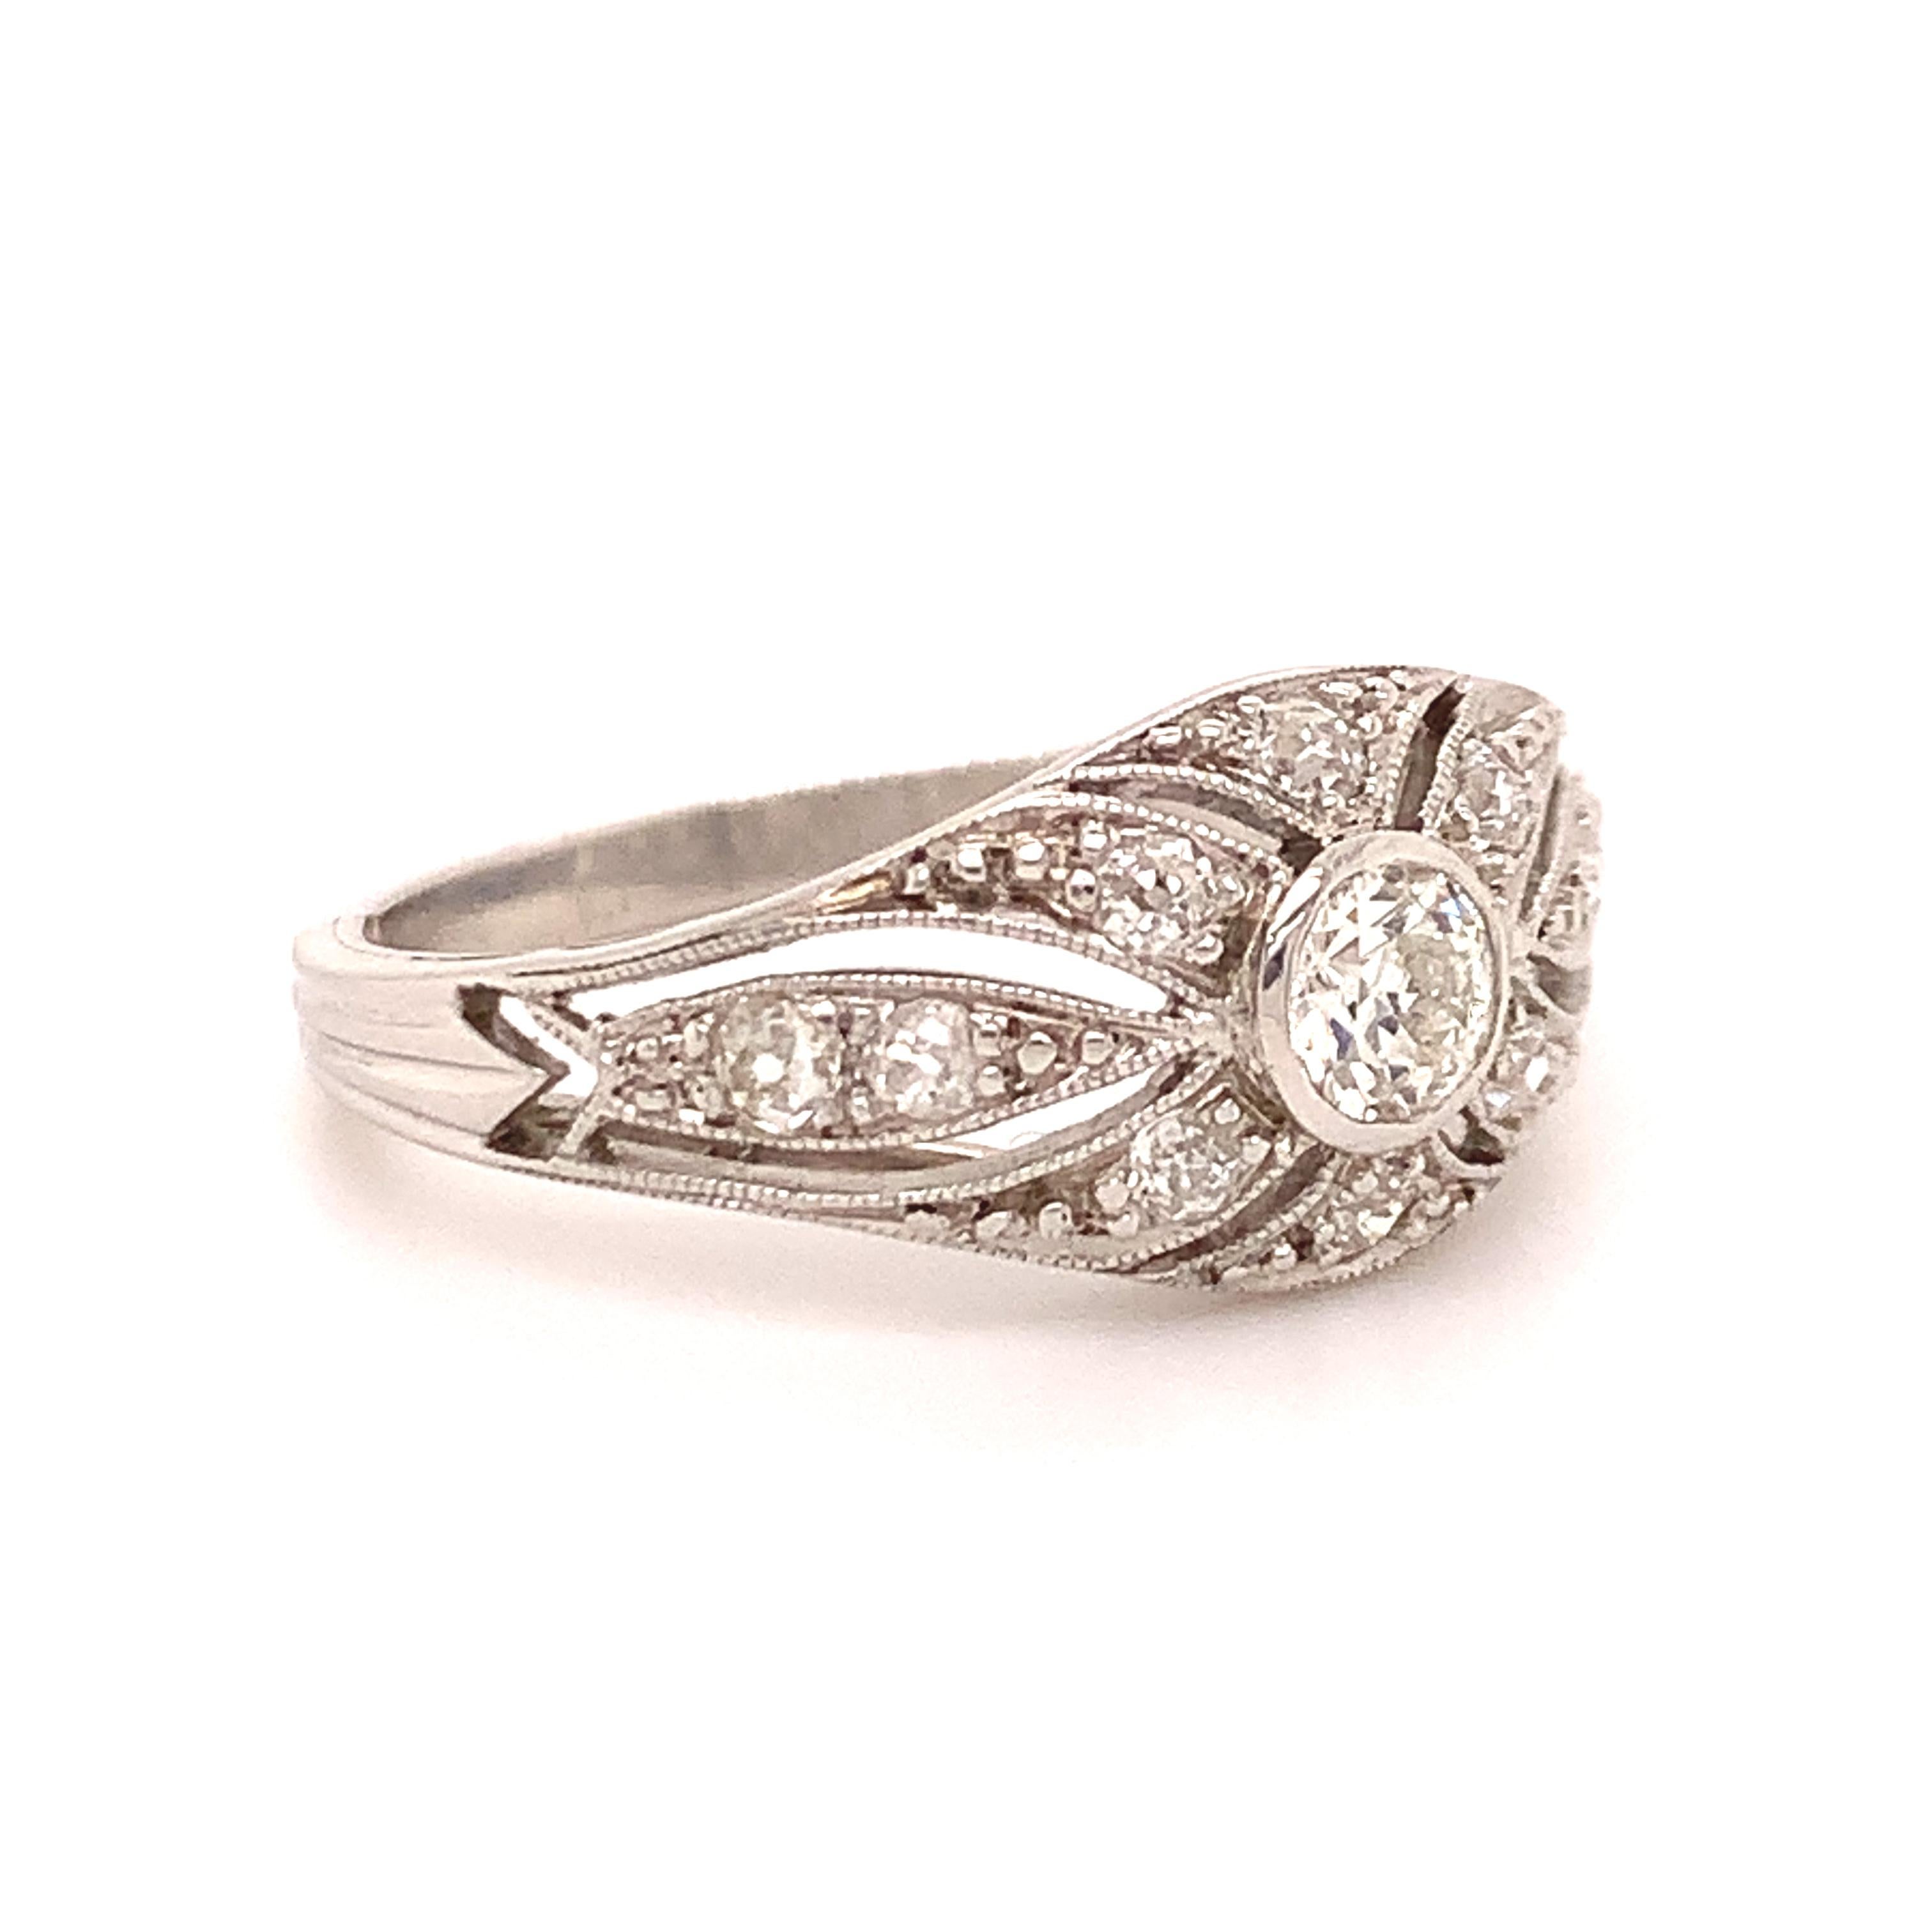 Lovely antique diamond engagement ring, set in platinum.  A softly rounded shape contours the low-set starburst of diamonds, with a shimmering old mine cut in the center.  Openwork gallery and engraved shank.  Approximately 3/4 carat total weight. 